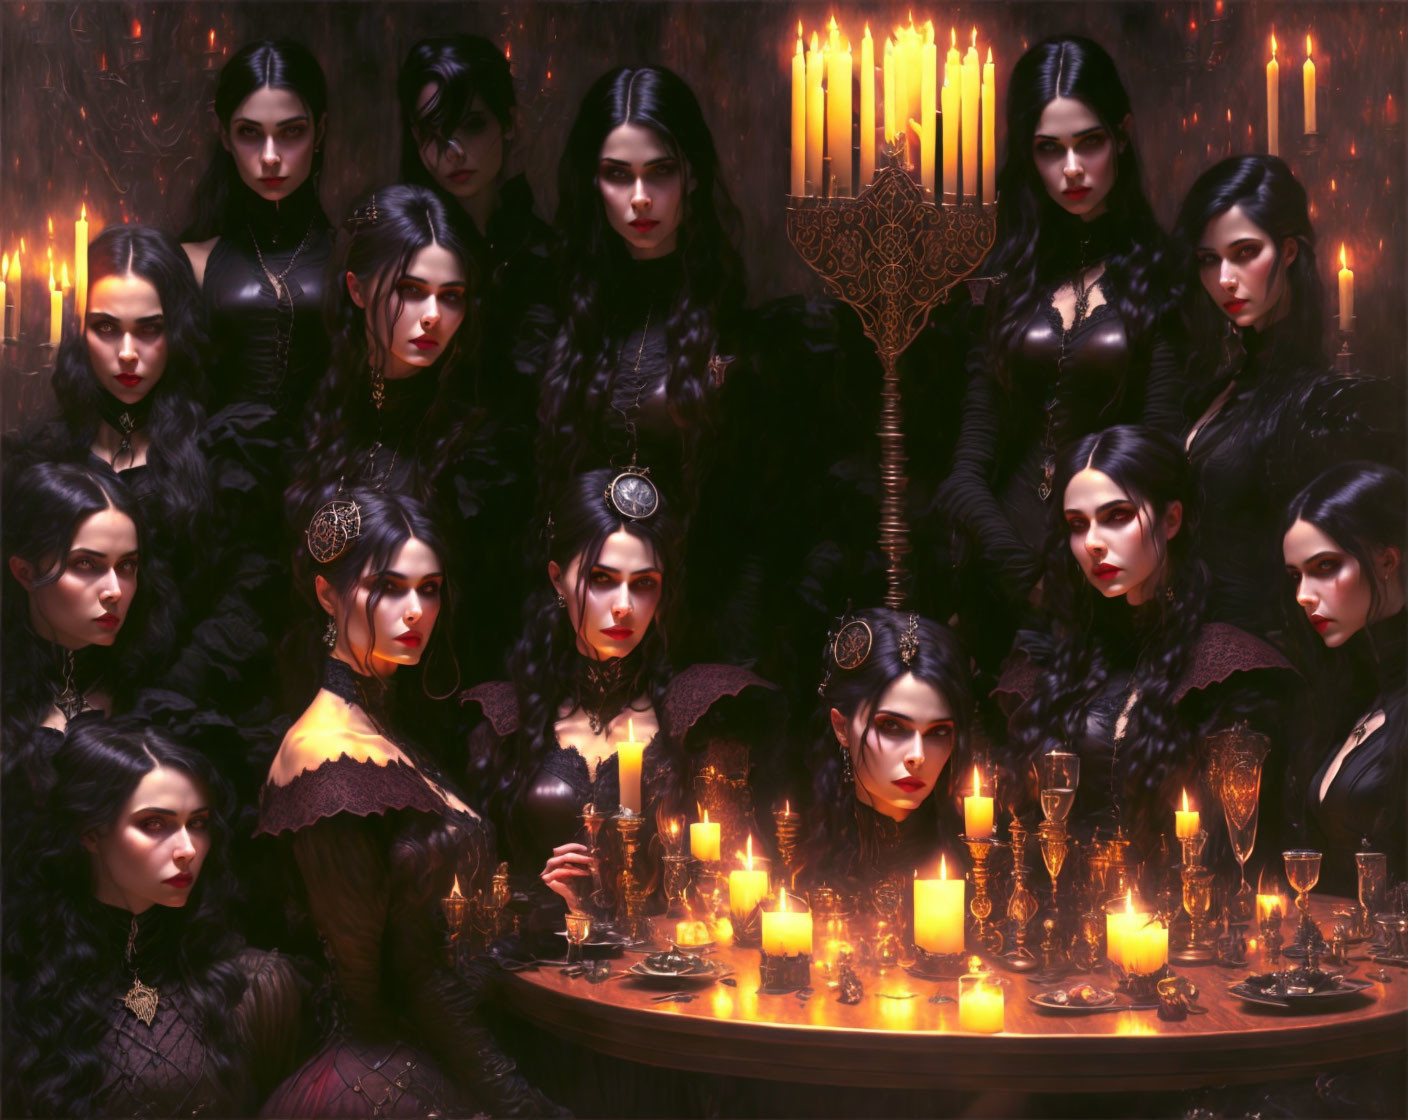 Council of The Vampire Coven